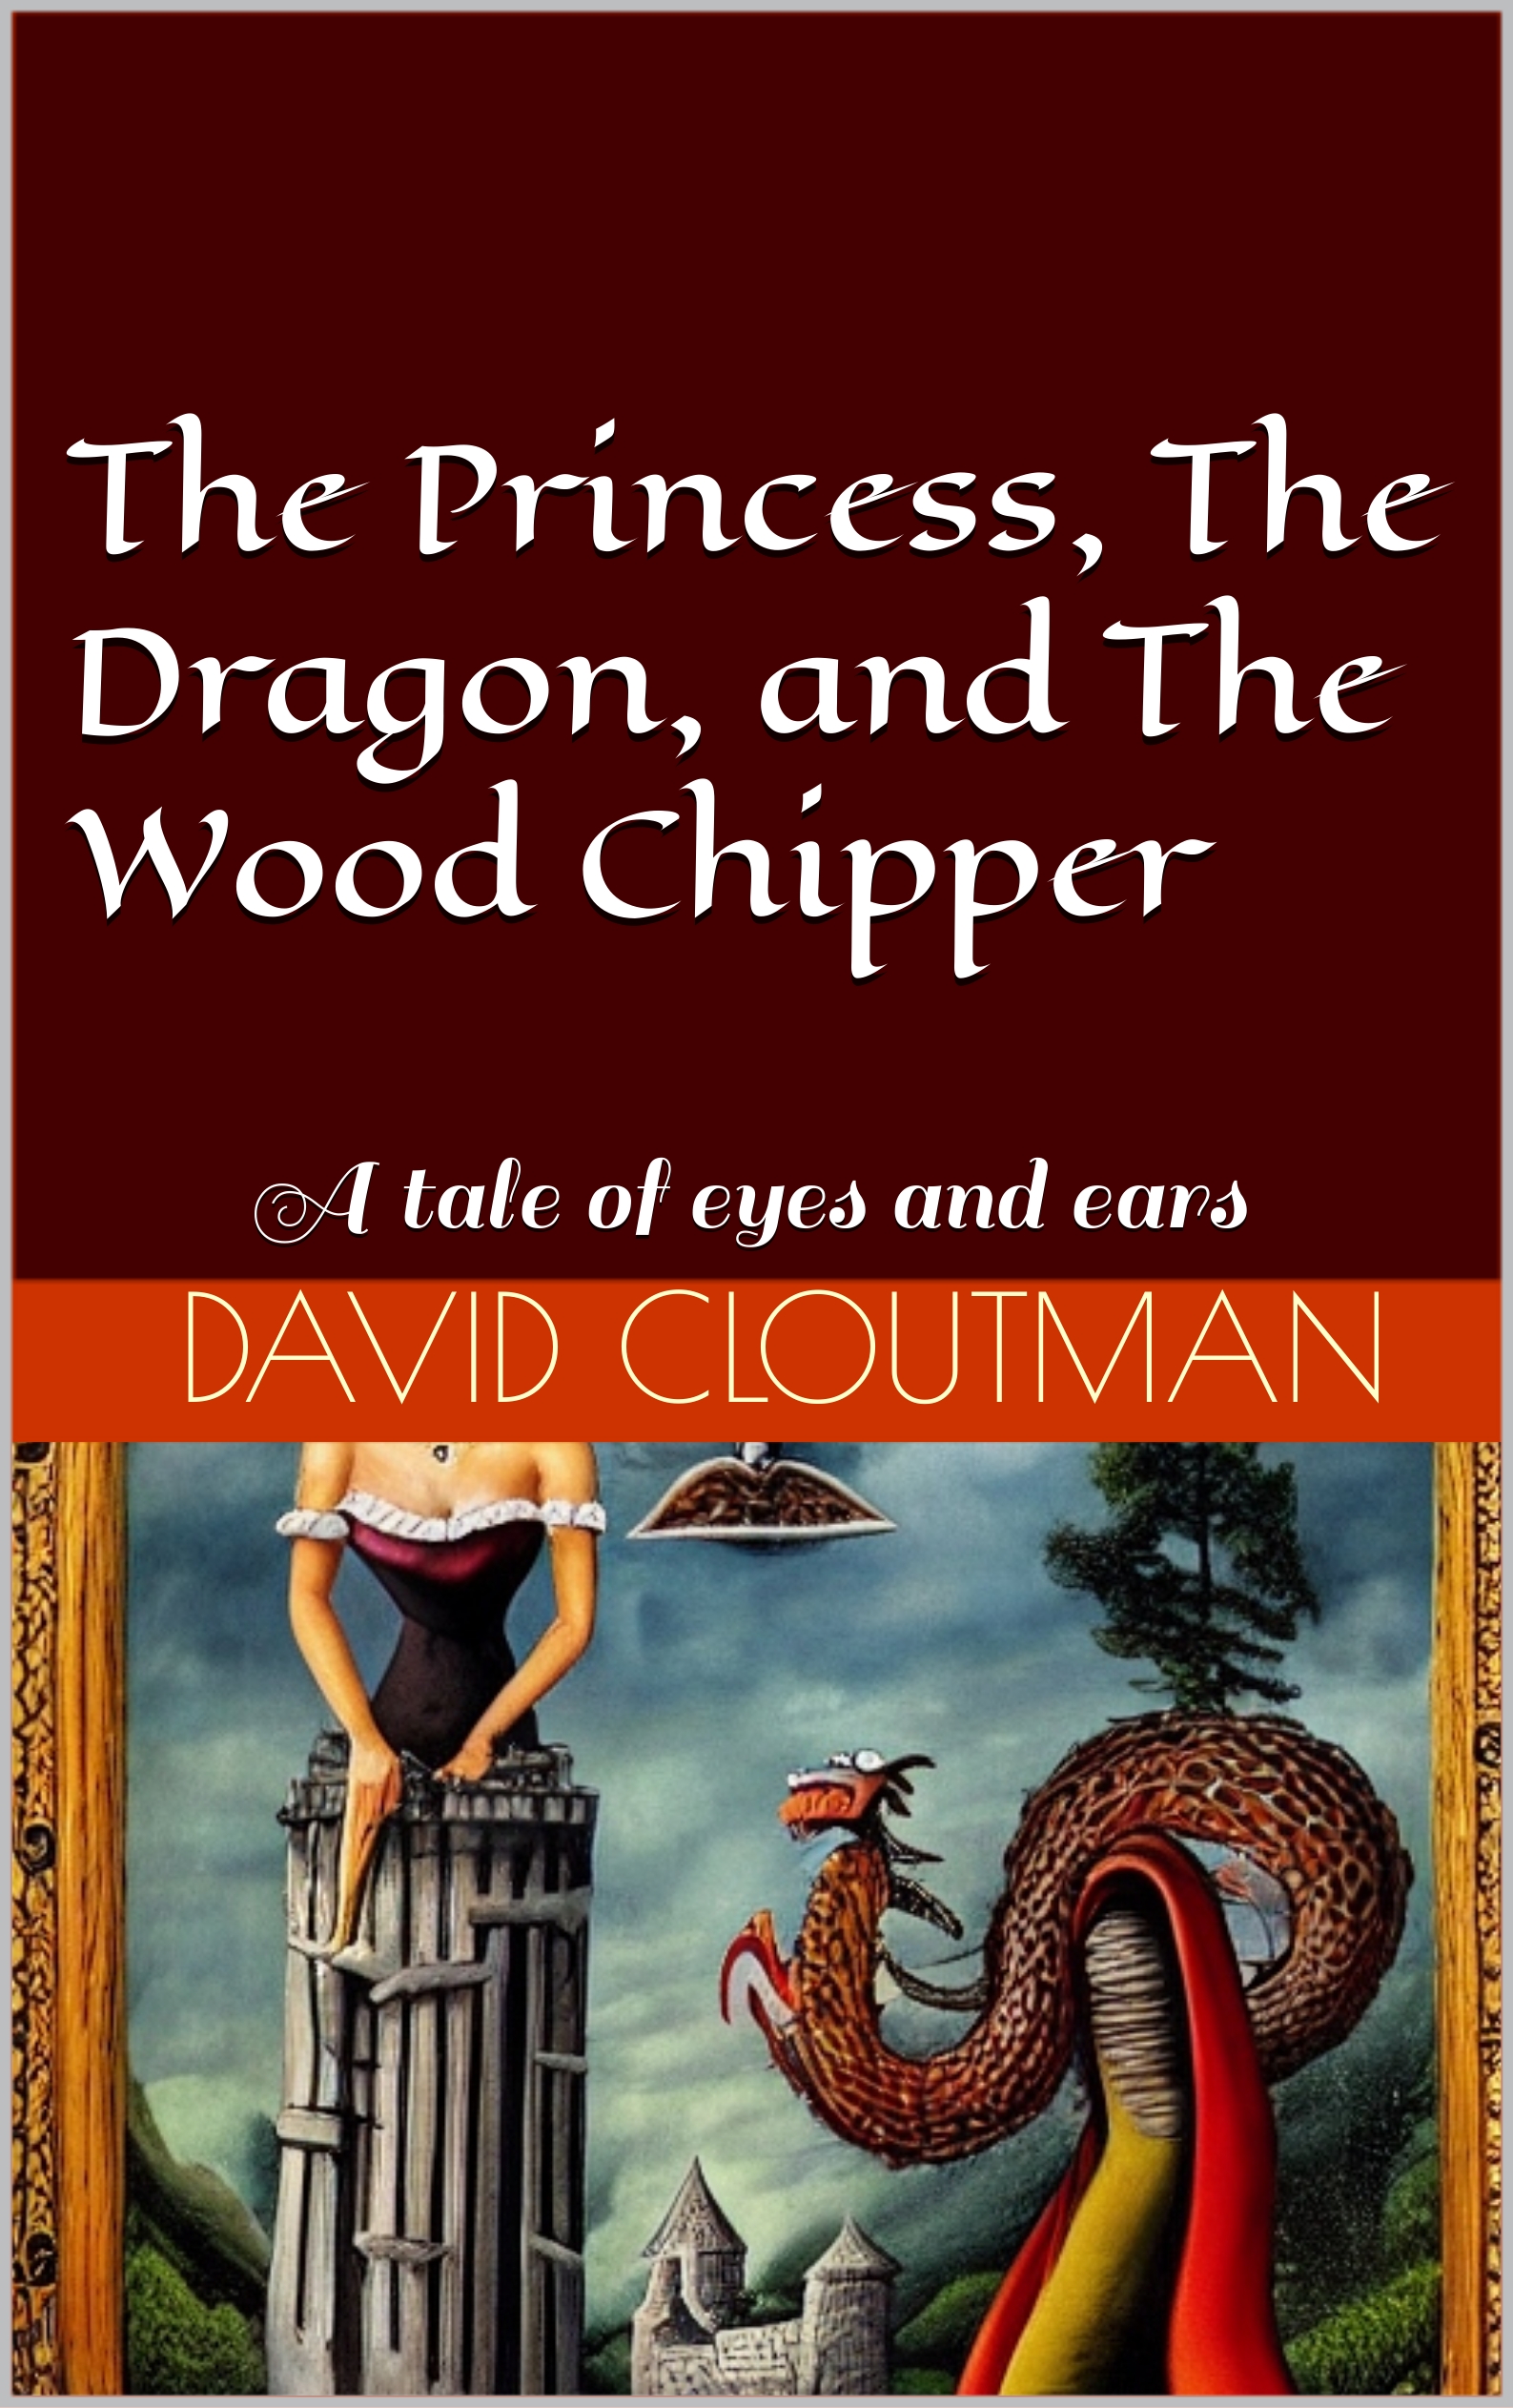 The Princess, the Dragon, and the Wood Chipper book cover